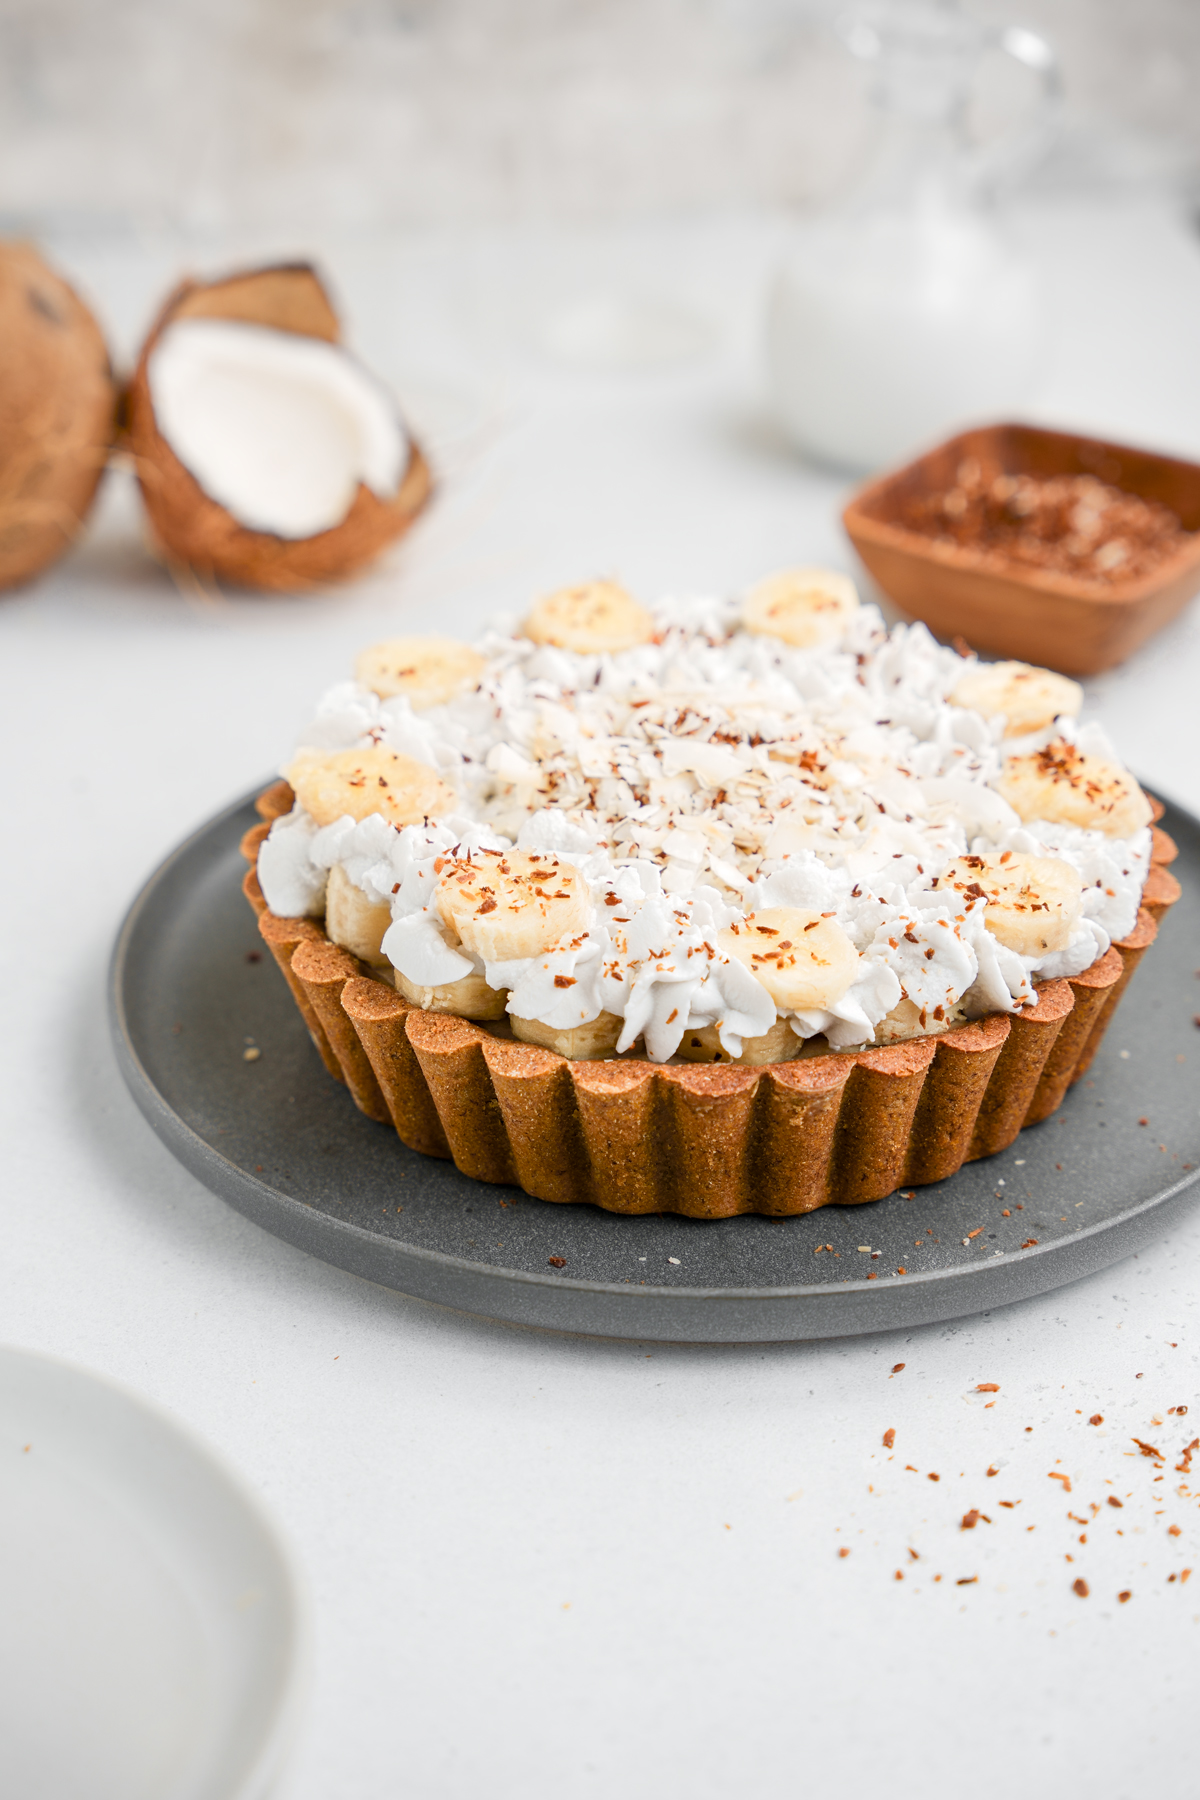 the complete healthy vegan banana cream pie with fresh coconut toppings